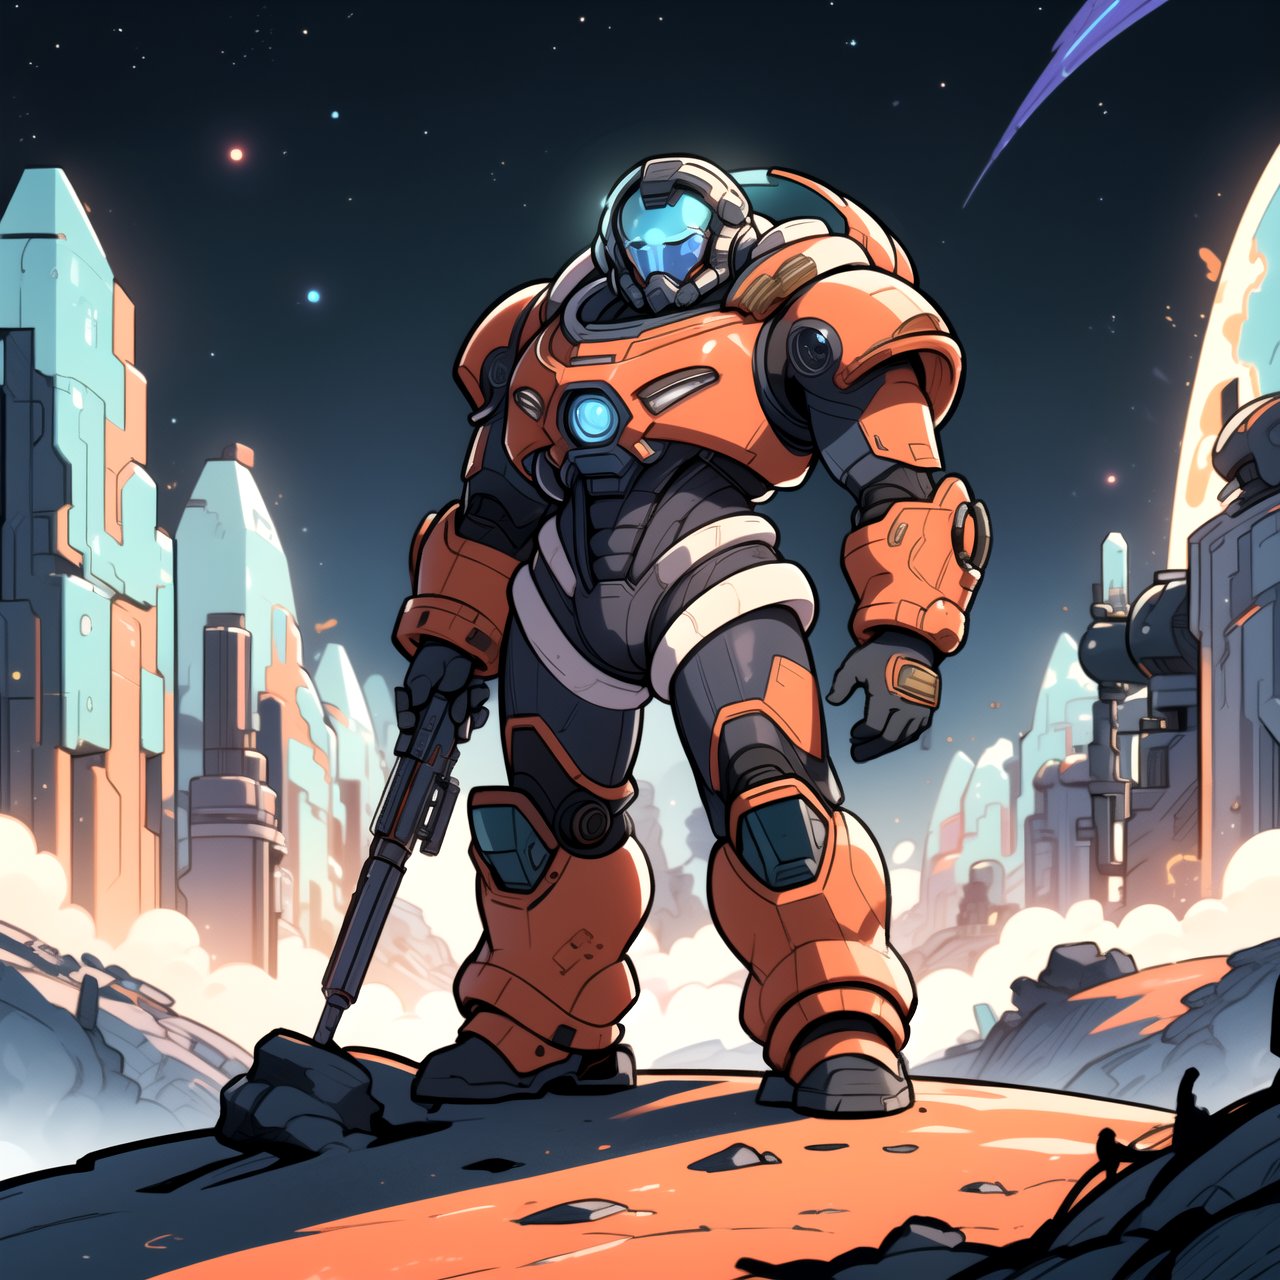 (masterpiece, best quality), (4K, HDR), ((Starcraft)), Terran Patrol:
"Create an image of a Terran Space Marine patrolling a desolate alien landscape. The marine's armor is bulky and heavily armed, with the visor reflecting the eerie glow of distant planets and stars."